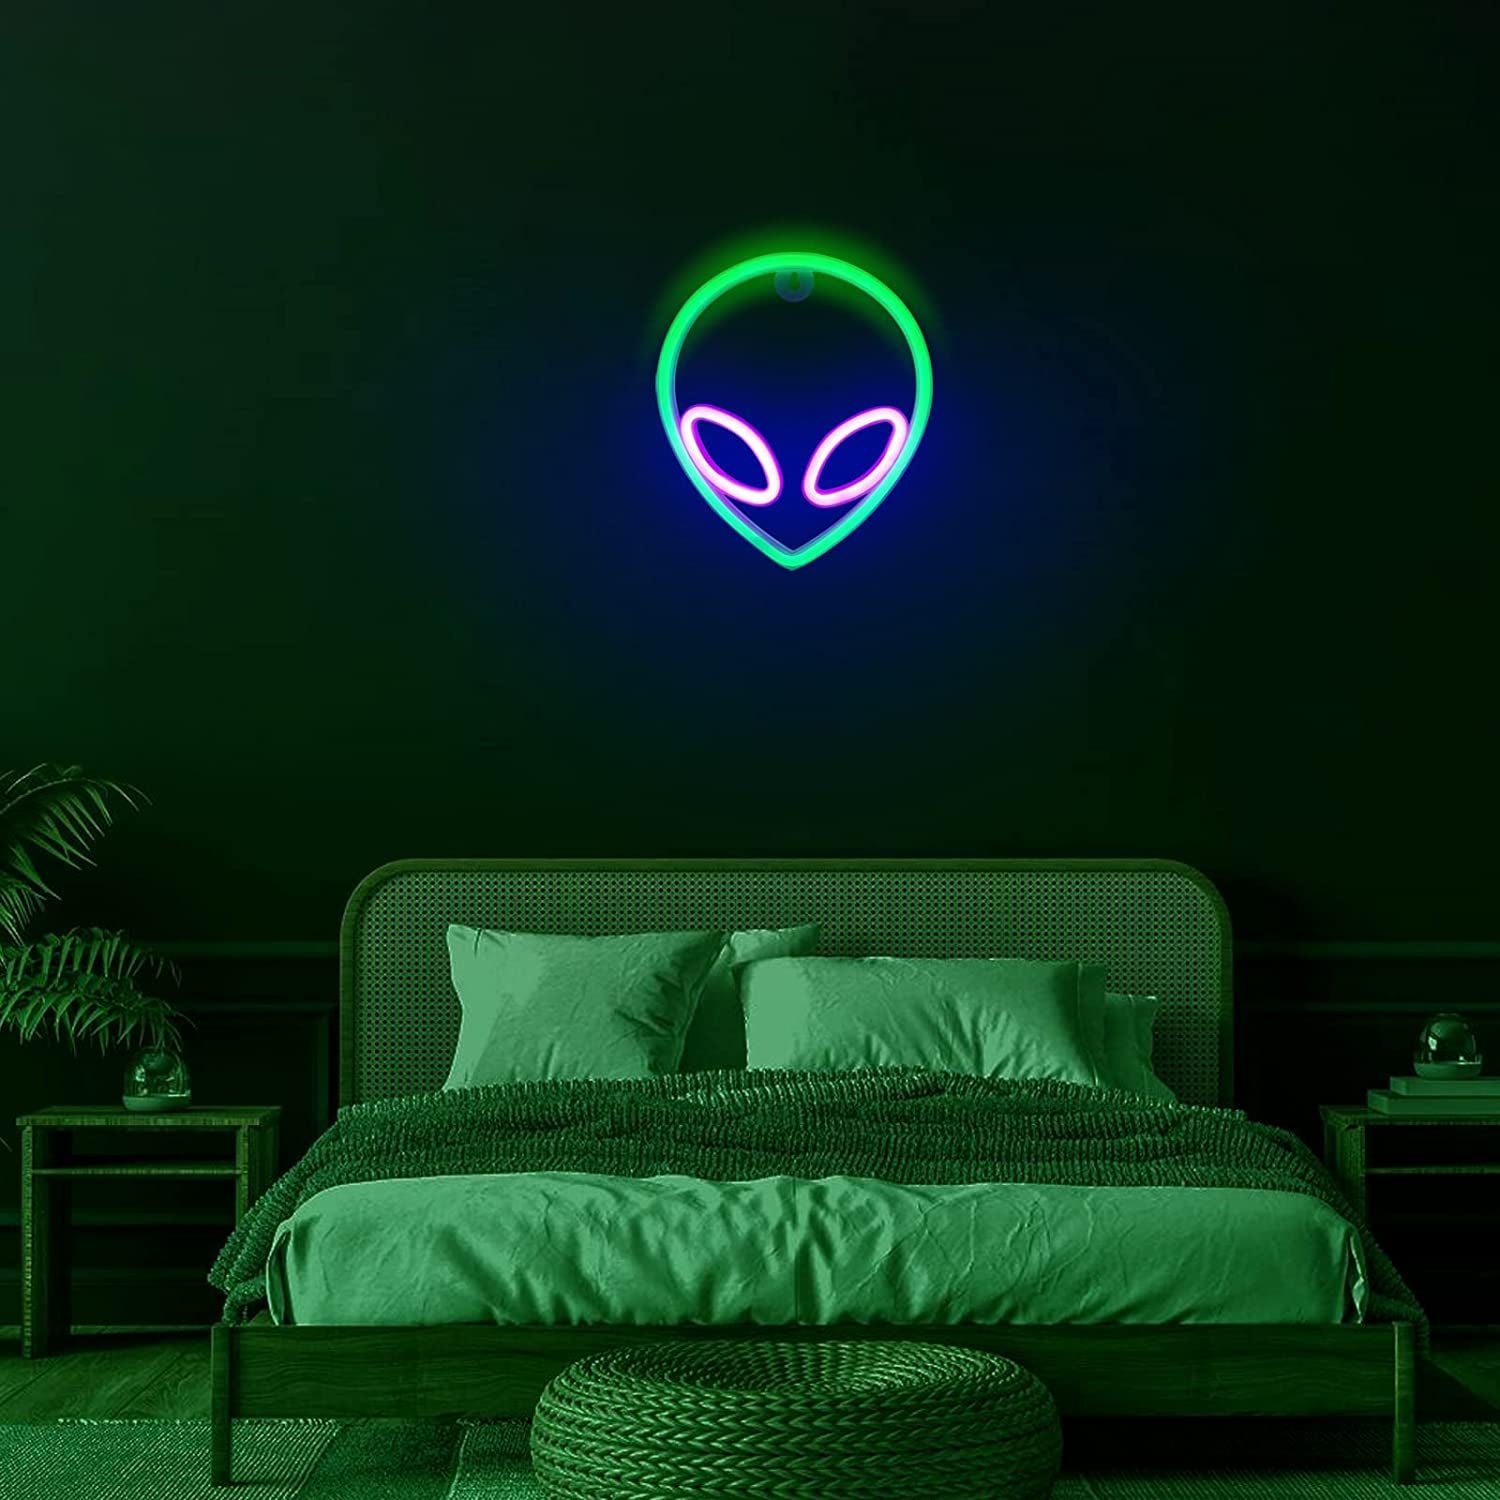 Alien Neon Sign Christmas Decoration Purple Green LED Alien Neon Light Usb/Battery Operated Cool Alien Light up Sign for Wall Decor Game Room Aesthetic Hanging Light for Man Cave Stuff, Bedroom, Bar, Party